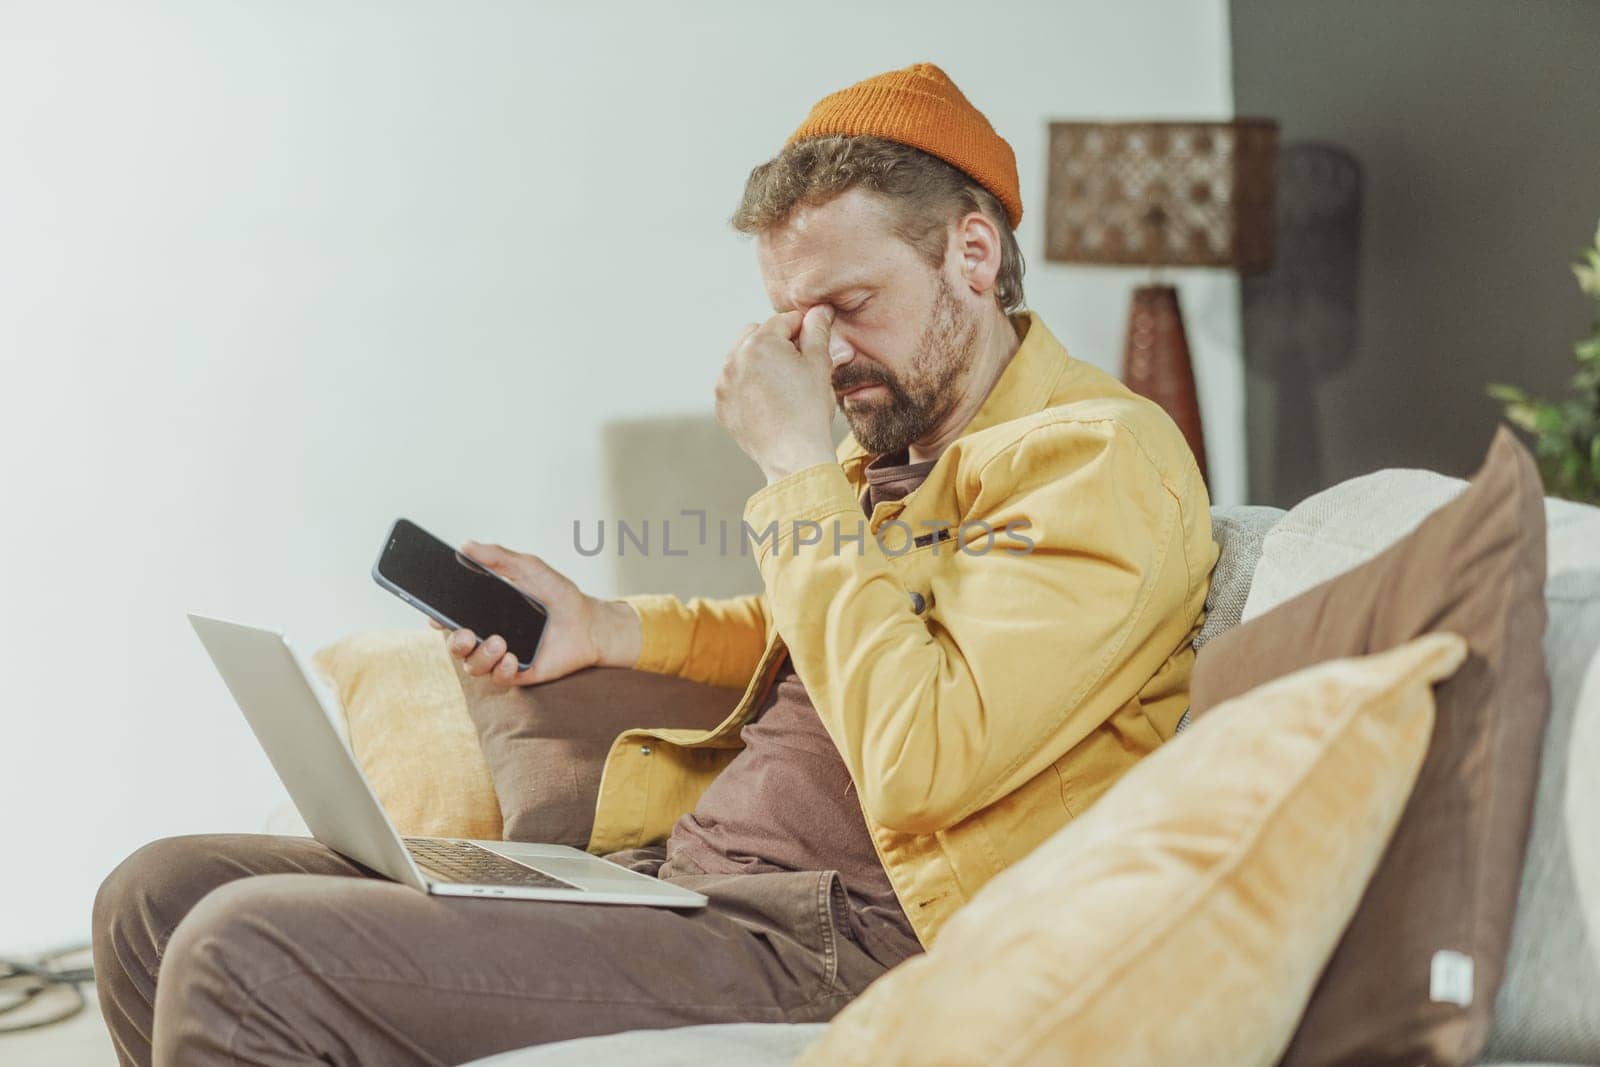 Tired man finds solace on his home sofa after session of browsing internet using both his mobile phone and laptop. Modern digital fatigue, as seeks rest and relaxation within comforts of his home. High quality photo